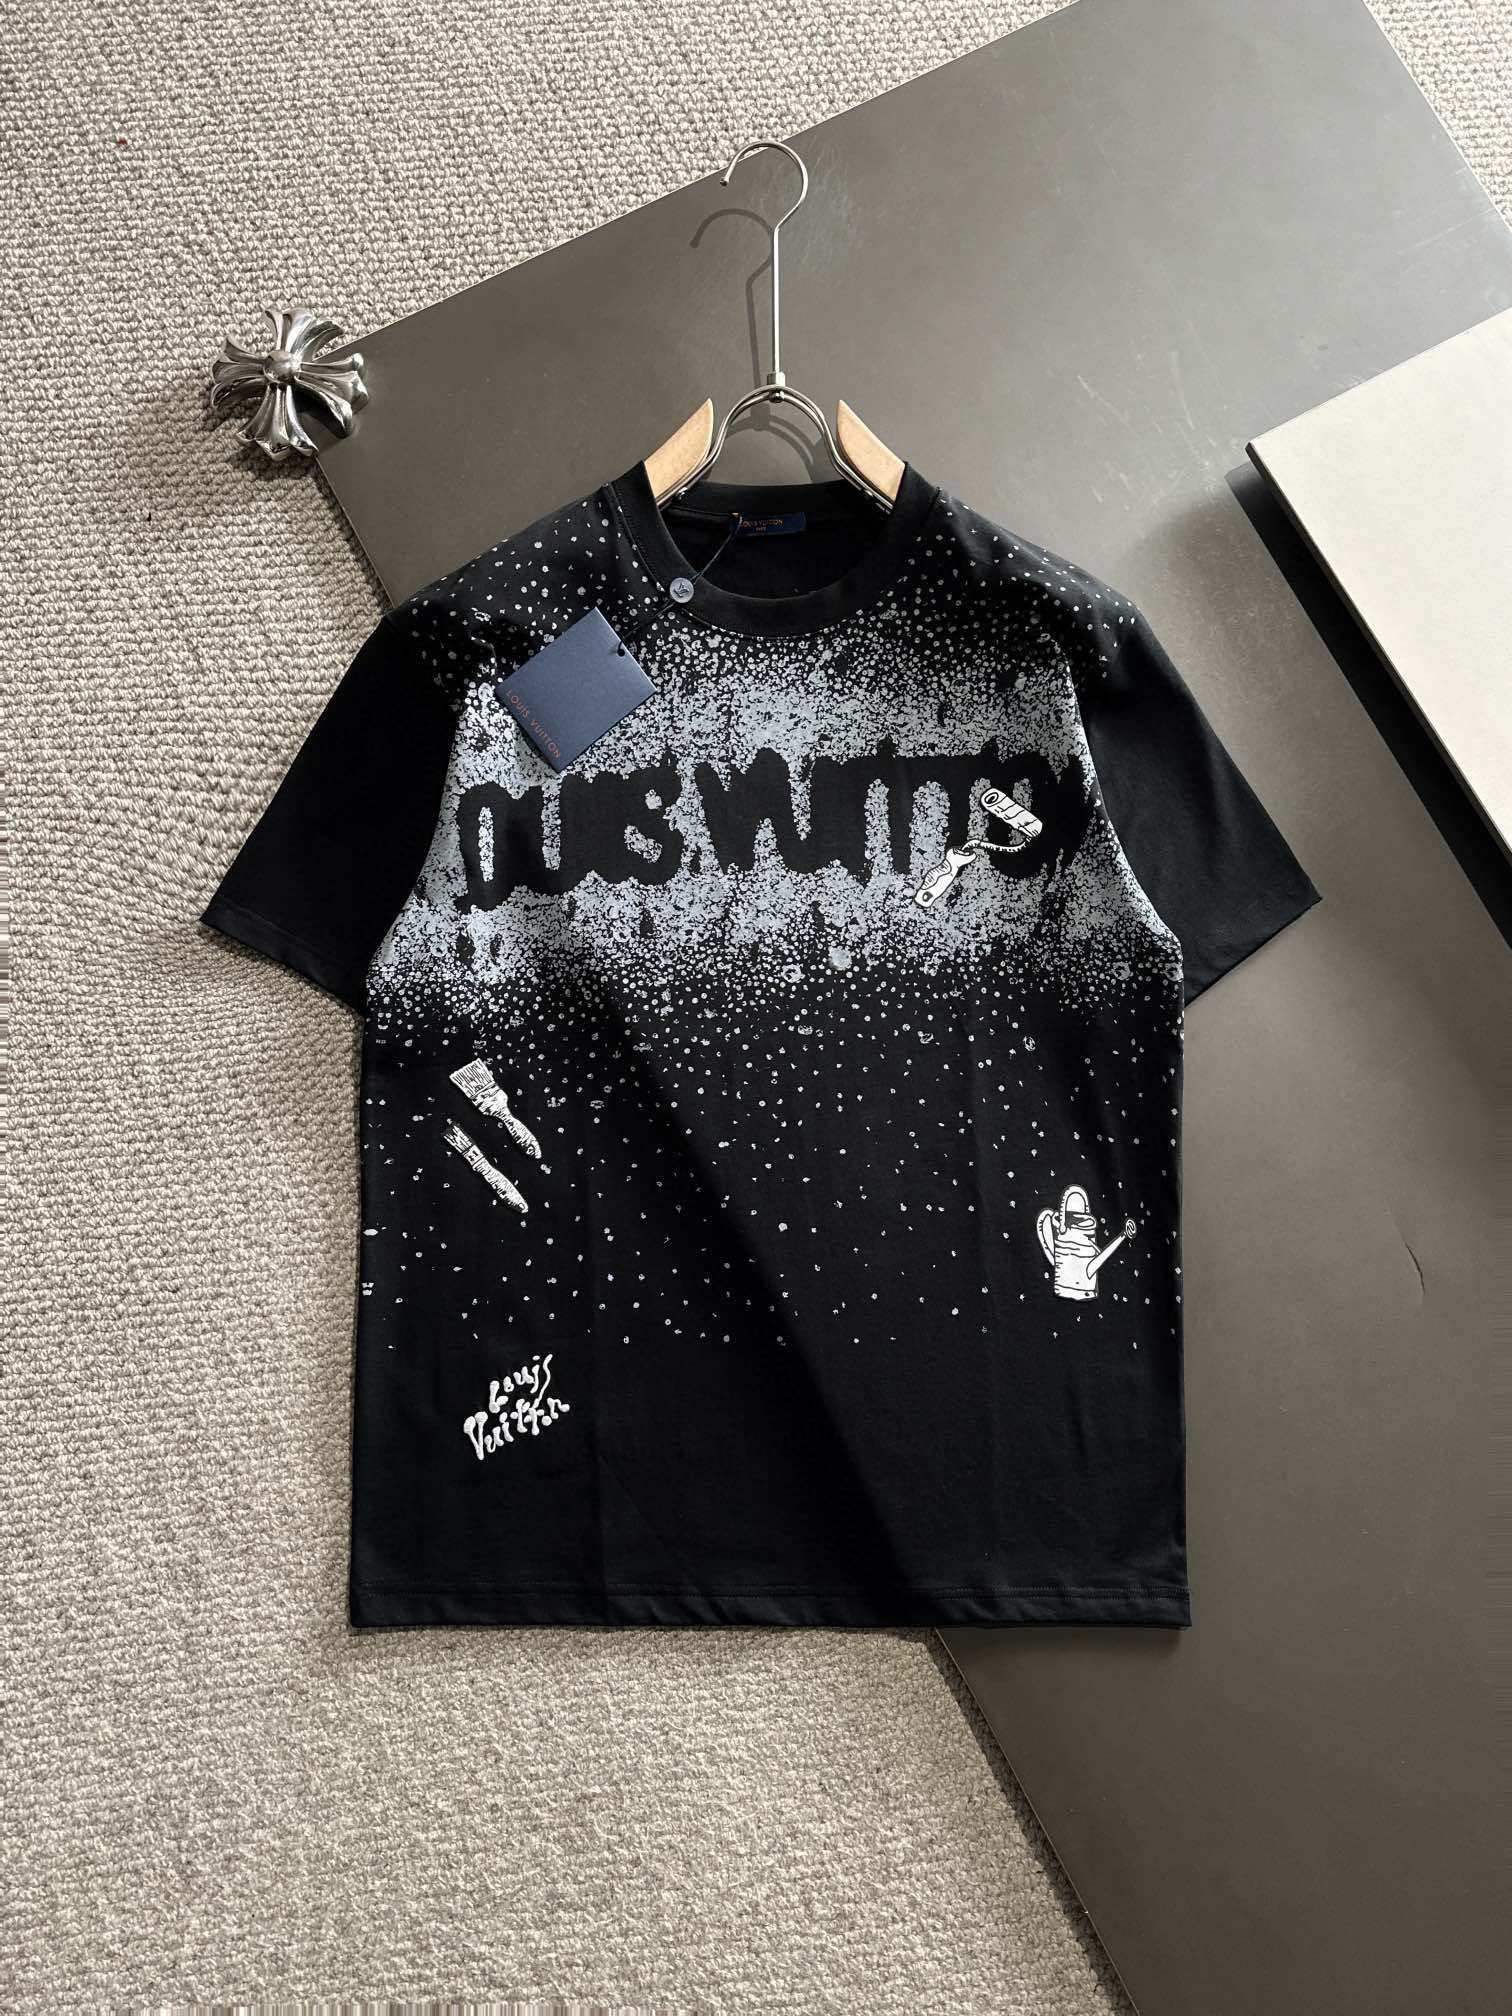 Louis Vuitton Clothing T-Shirt Black White Embroidery Unisex Spring Collection Short Sleeve